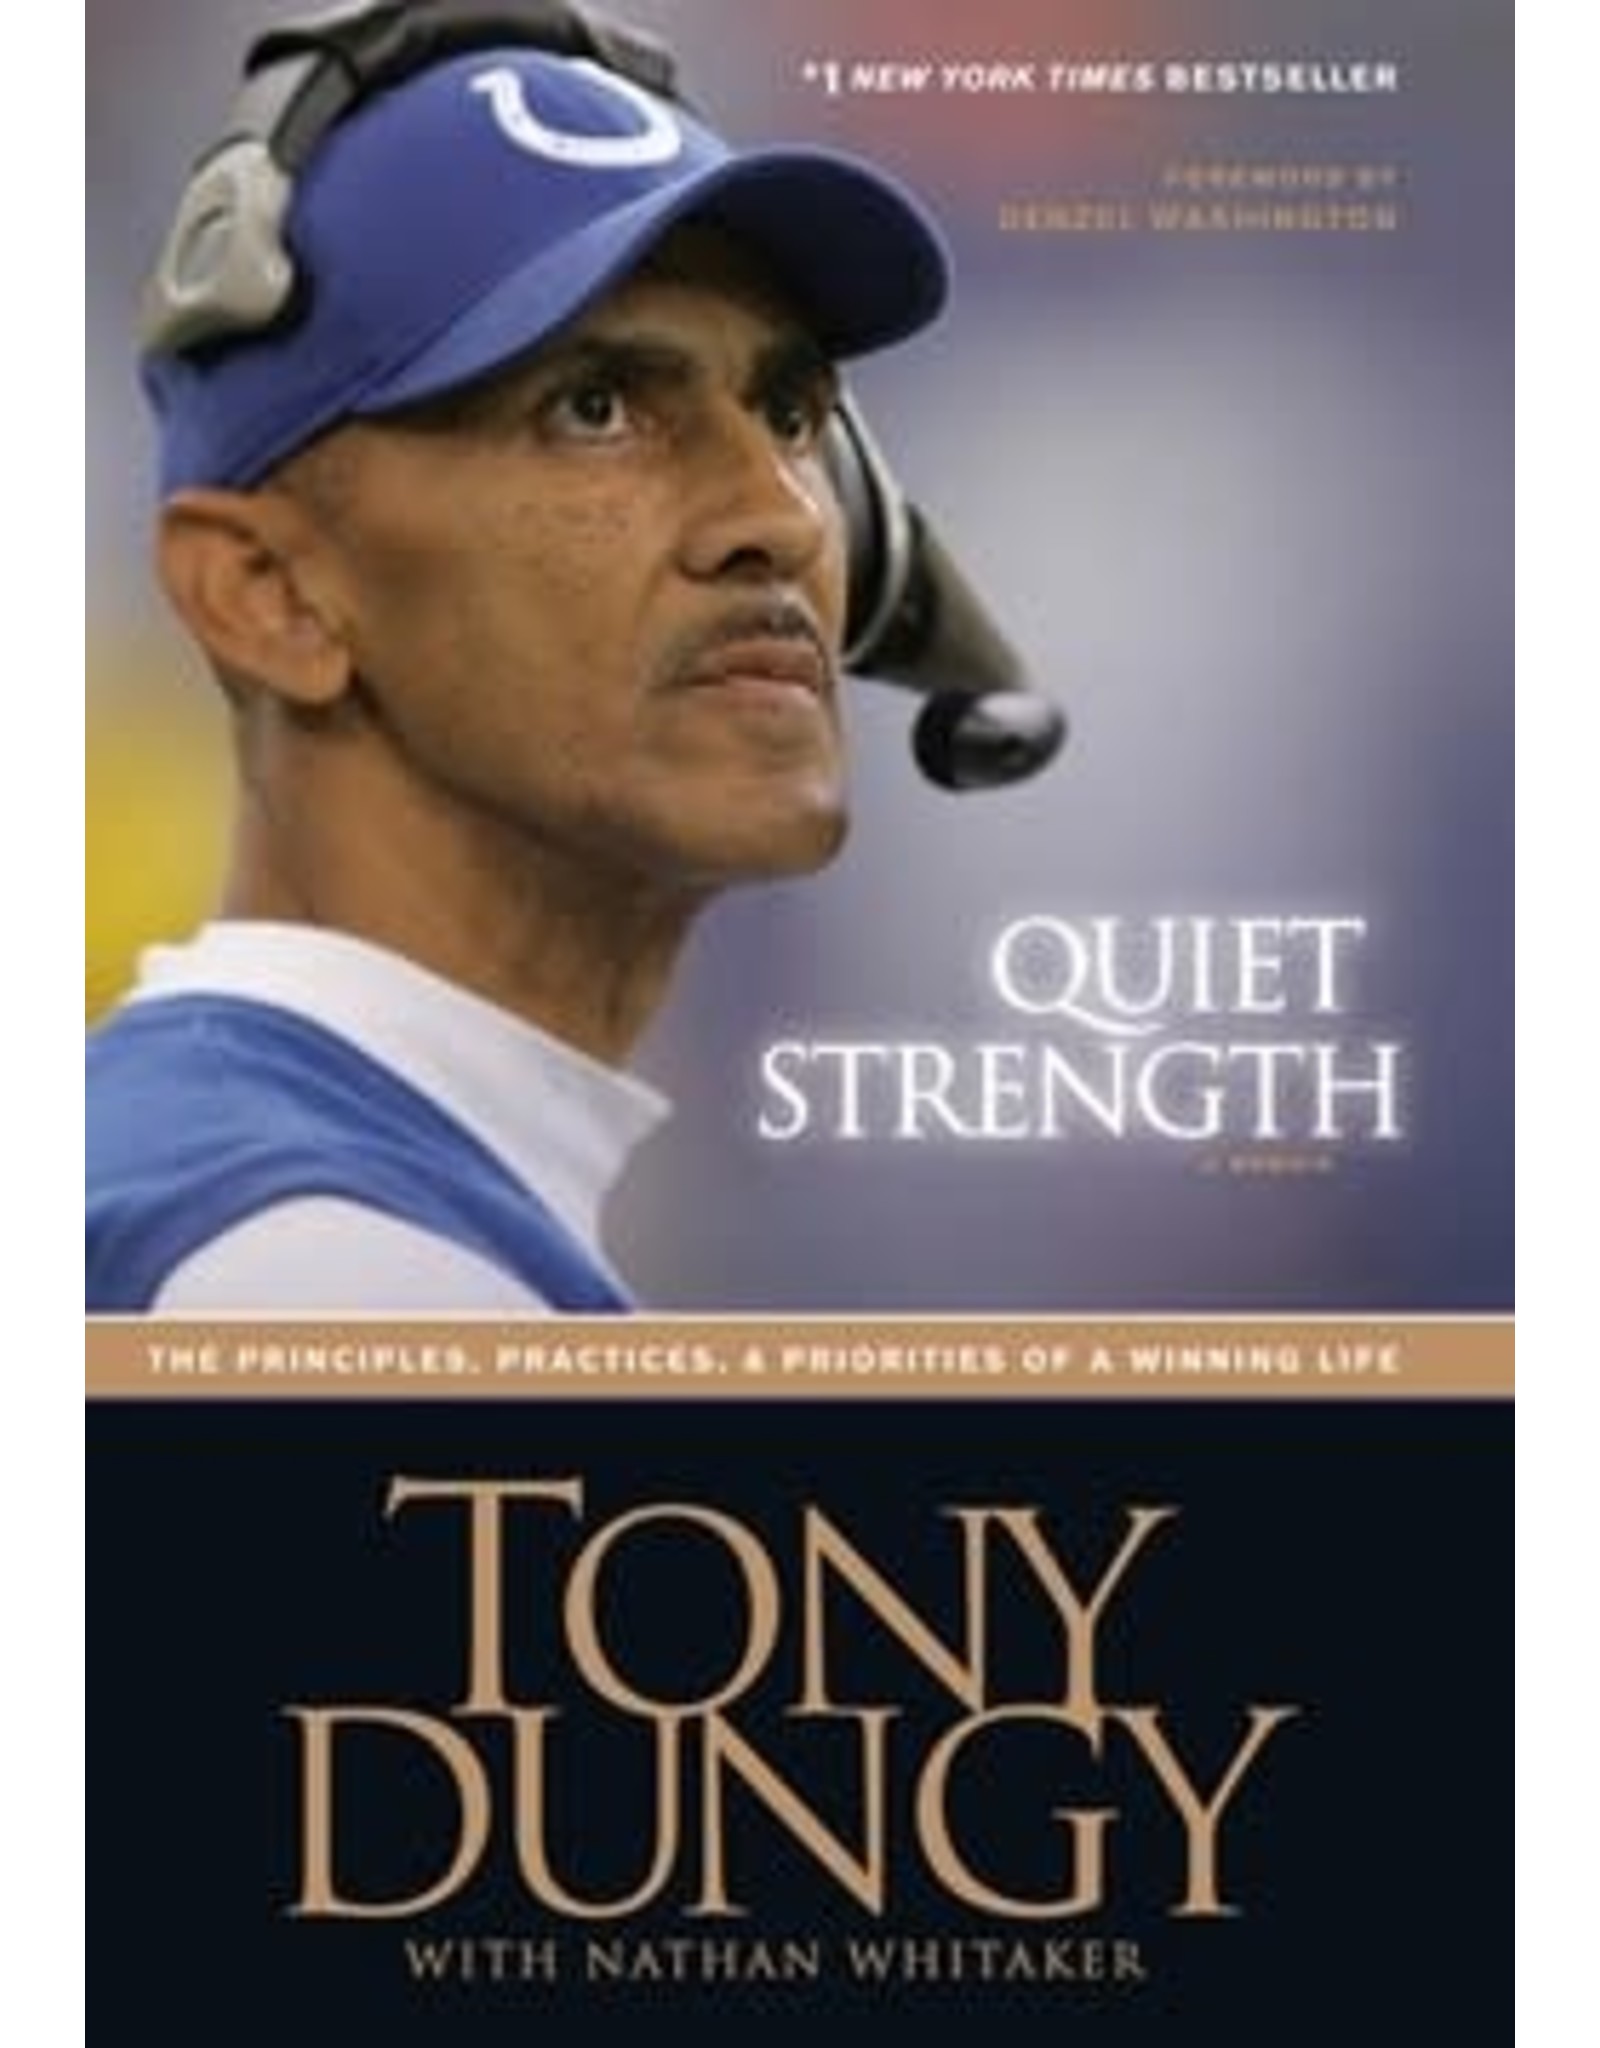 Quiet Strength: The Principles, Practices, & Priorities of a Winning Life by Tony Dungy (Hardcover)